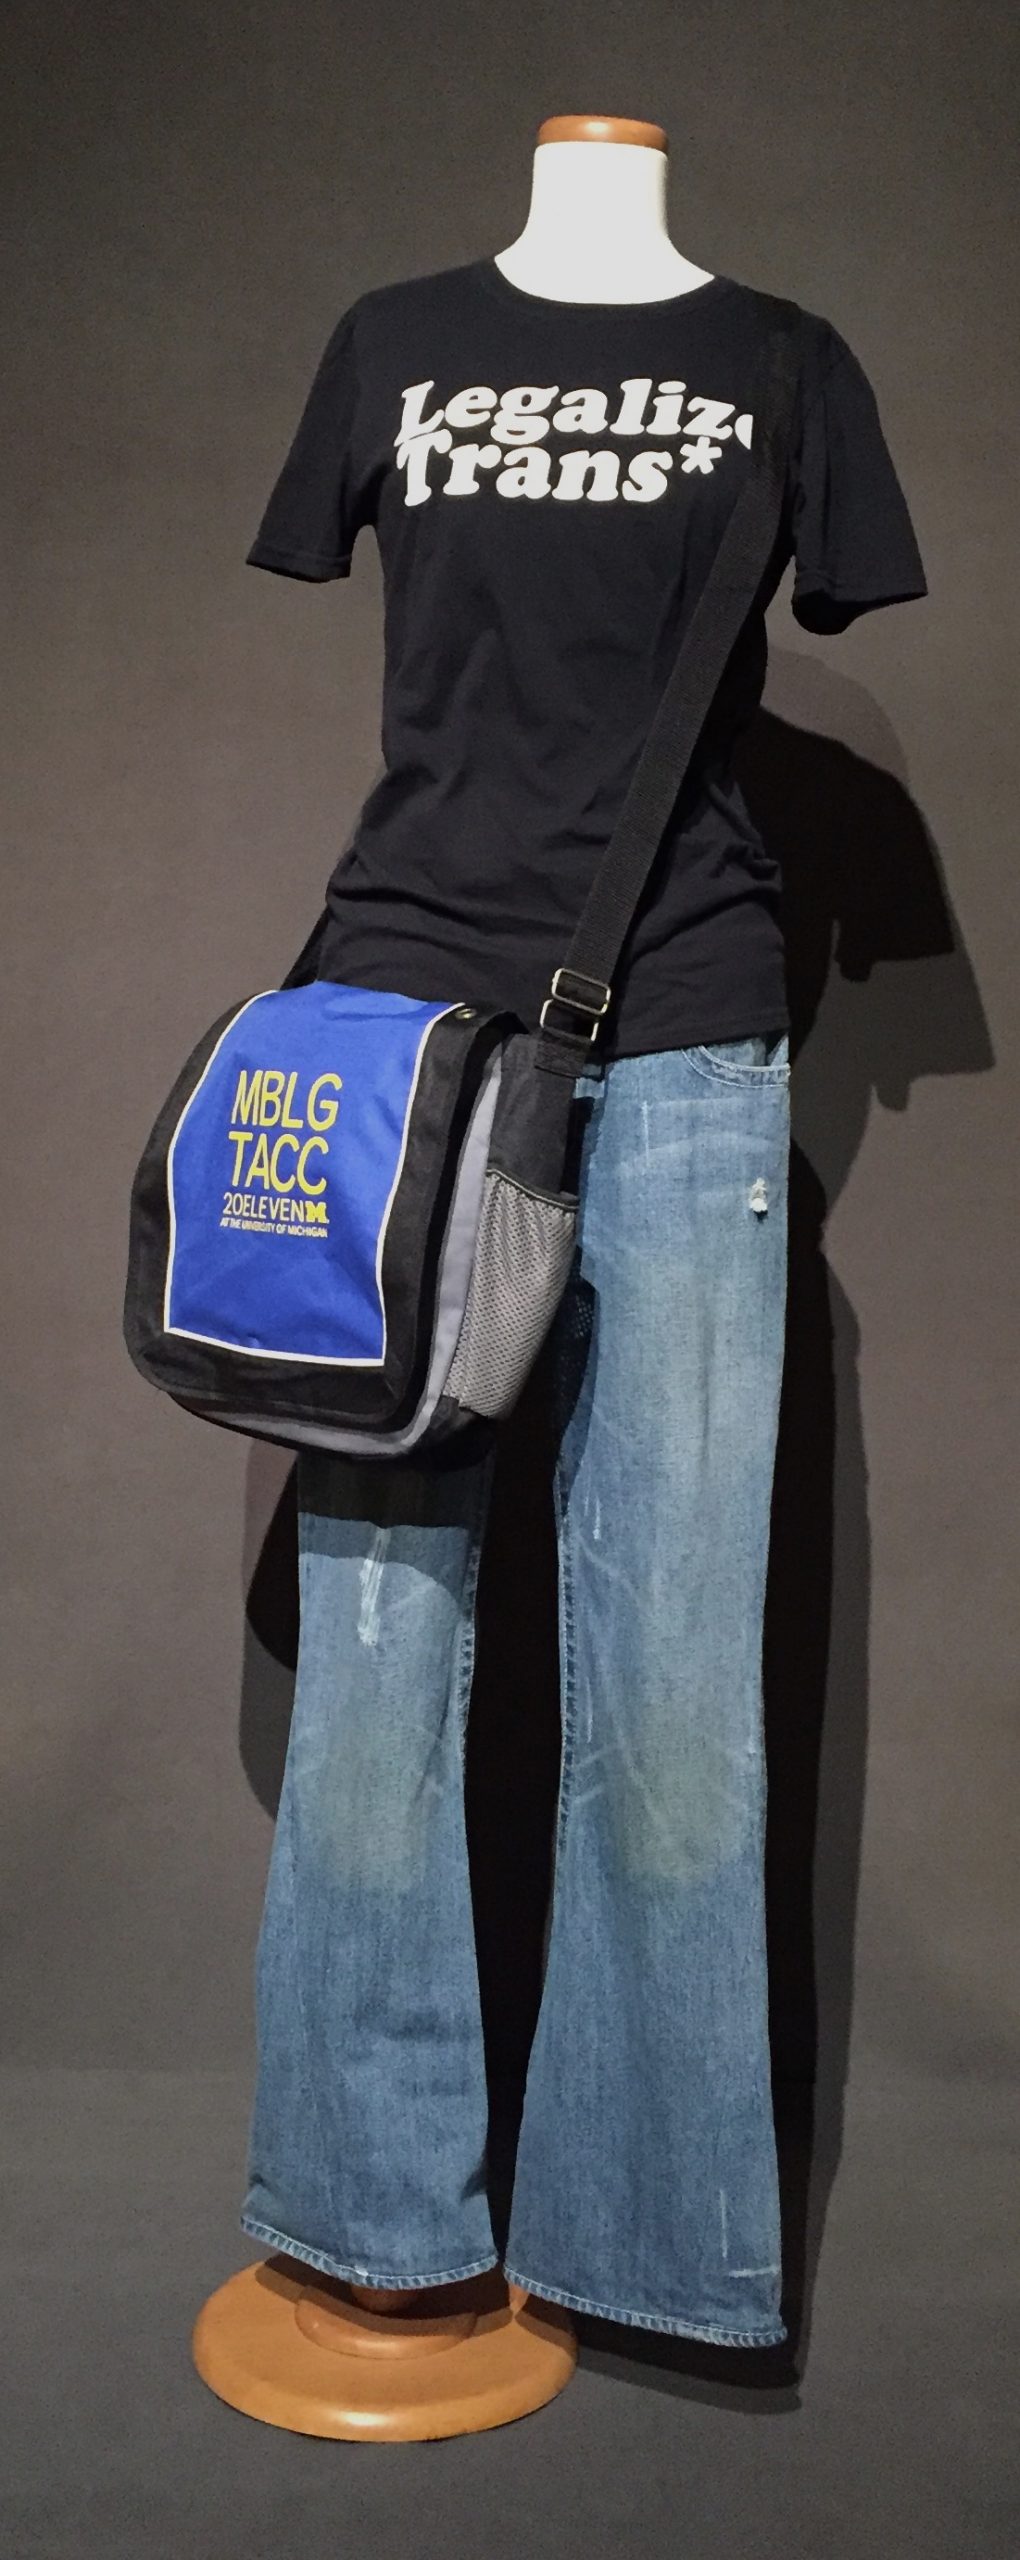 Black shirt with white text reading: "Legalize Trans*", flared jeans, and blue and black messenger bag with yellow text reading: "MBLG TACC 20ELEVEN at the University of Michigan"